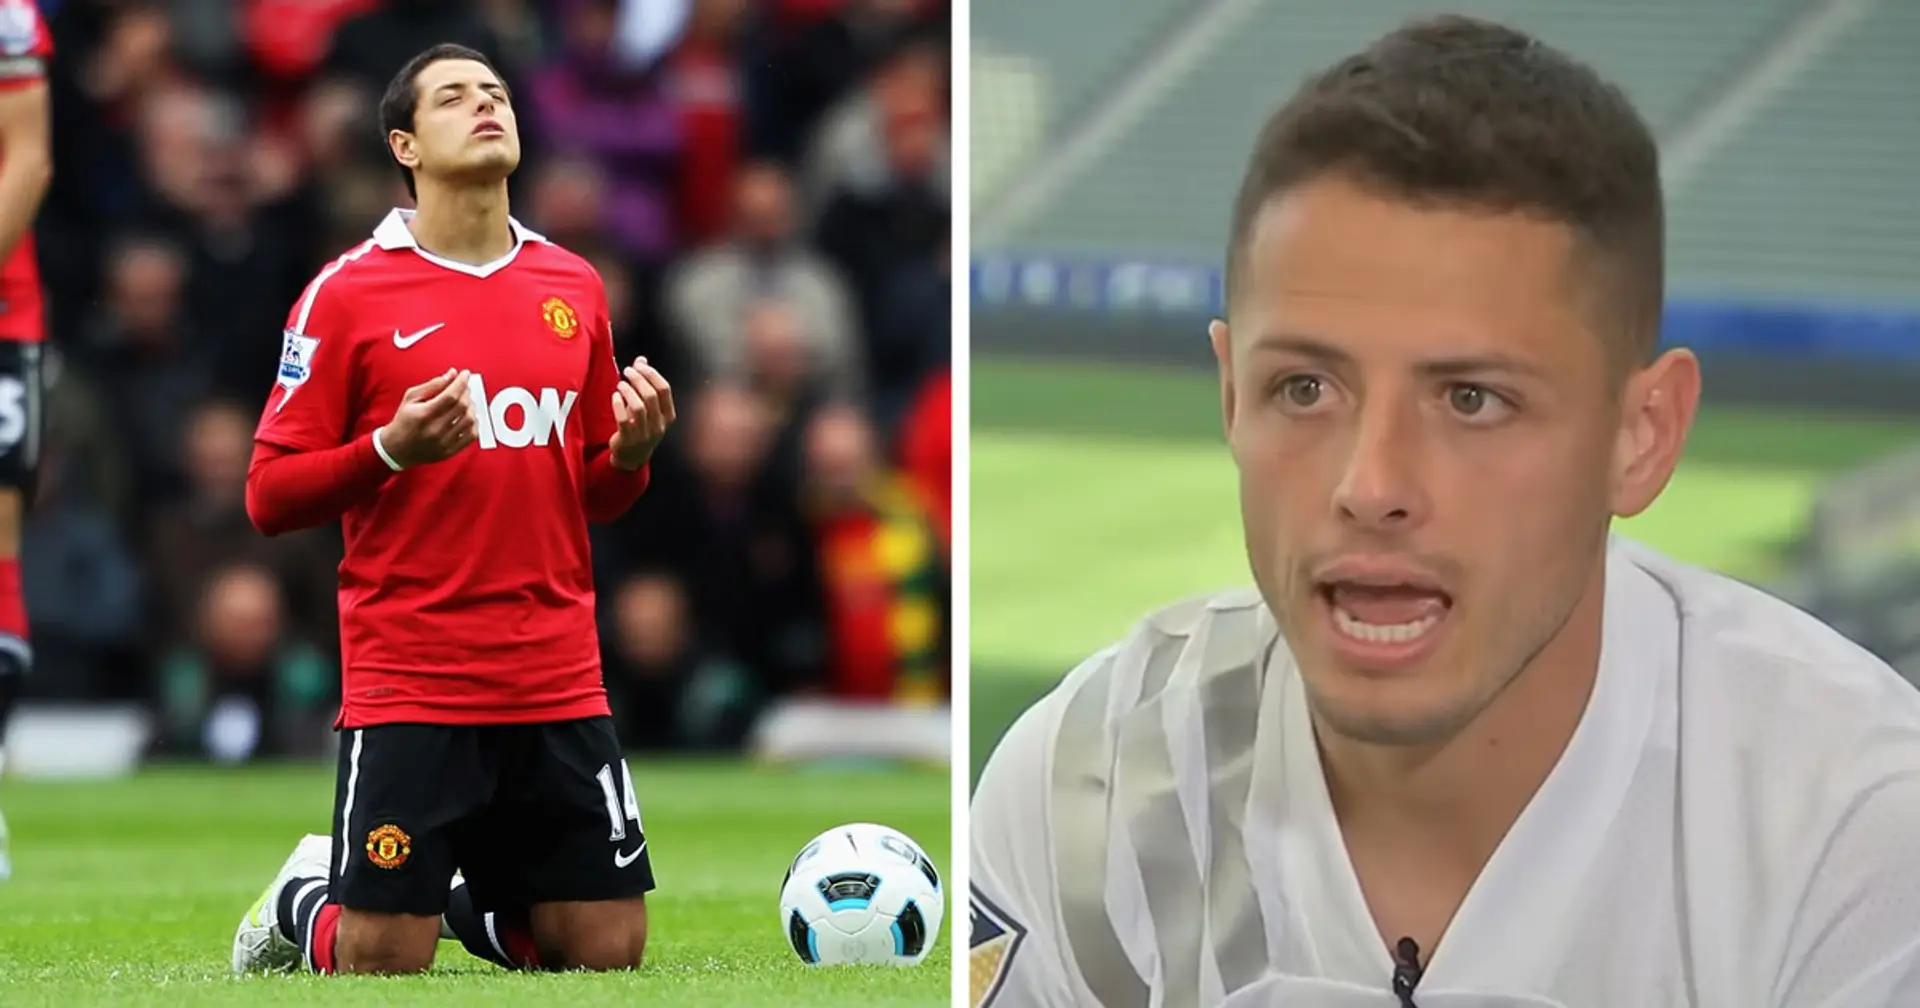 'No dad, it's not true. Impossible': Chicharito recalls the moment he learned about United's interest in him